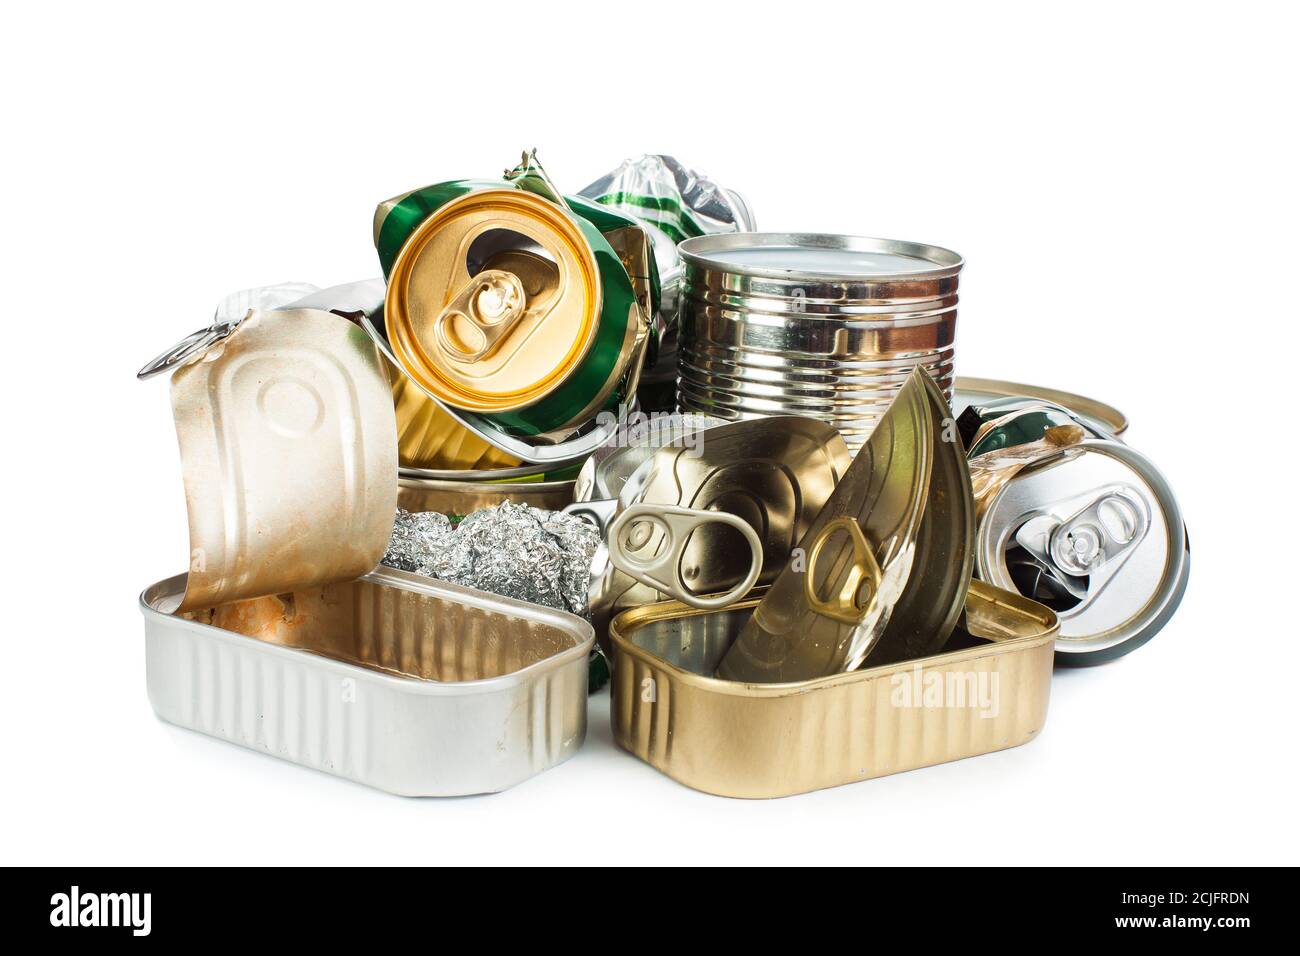 Segregated metal wastes ready to recycling Stock Photo